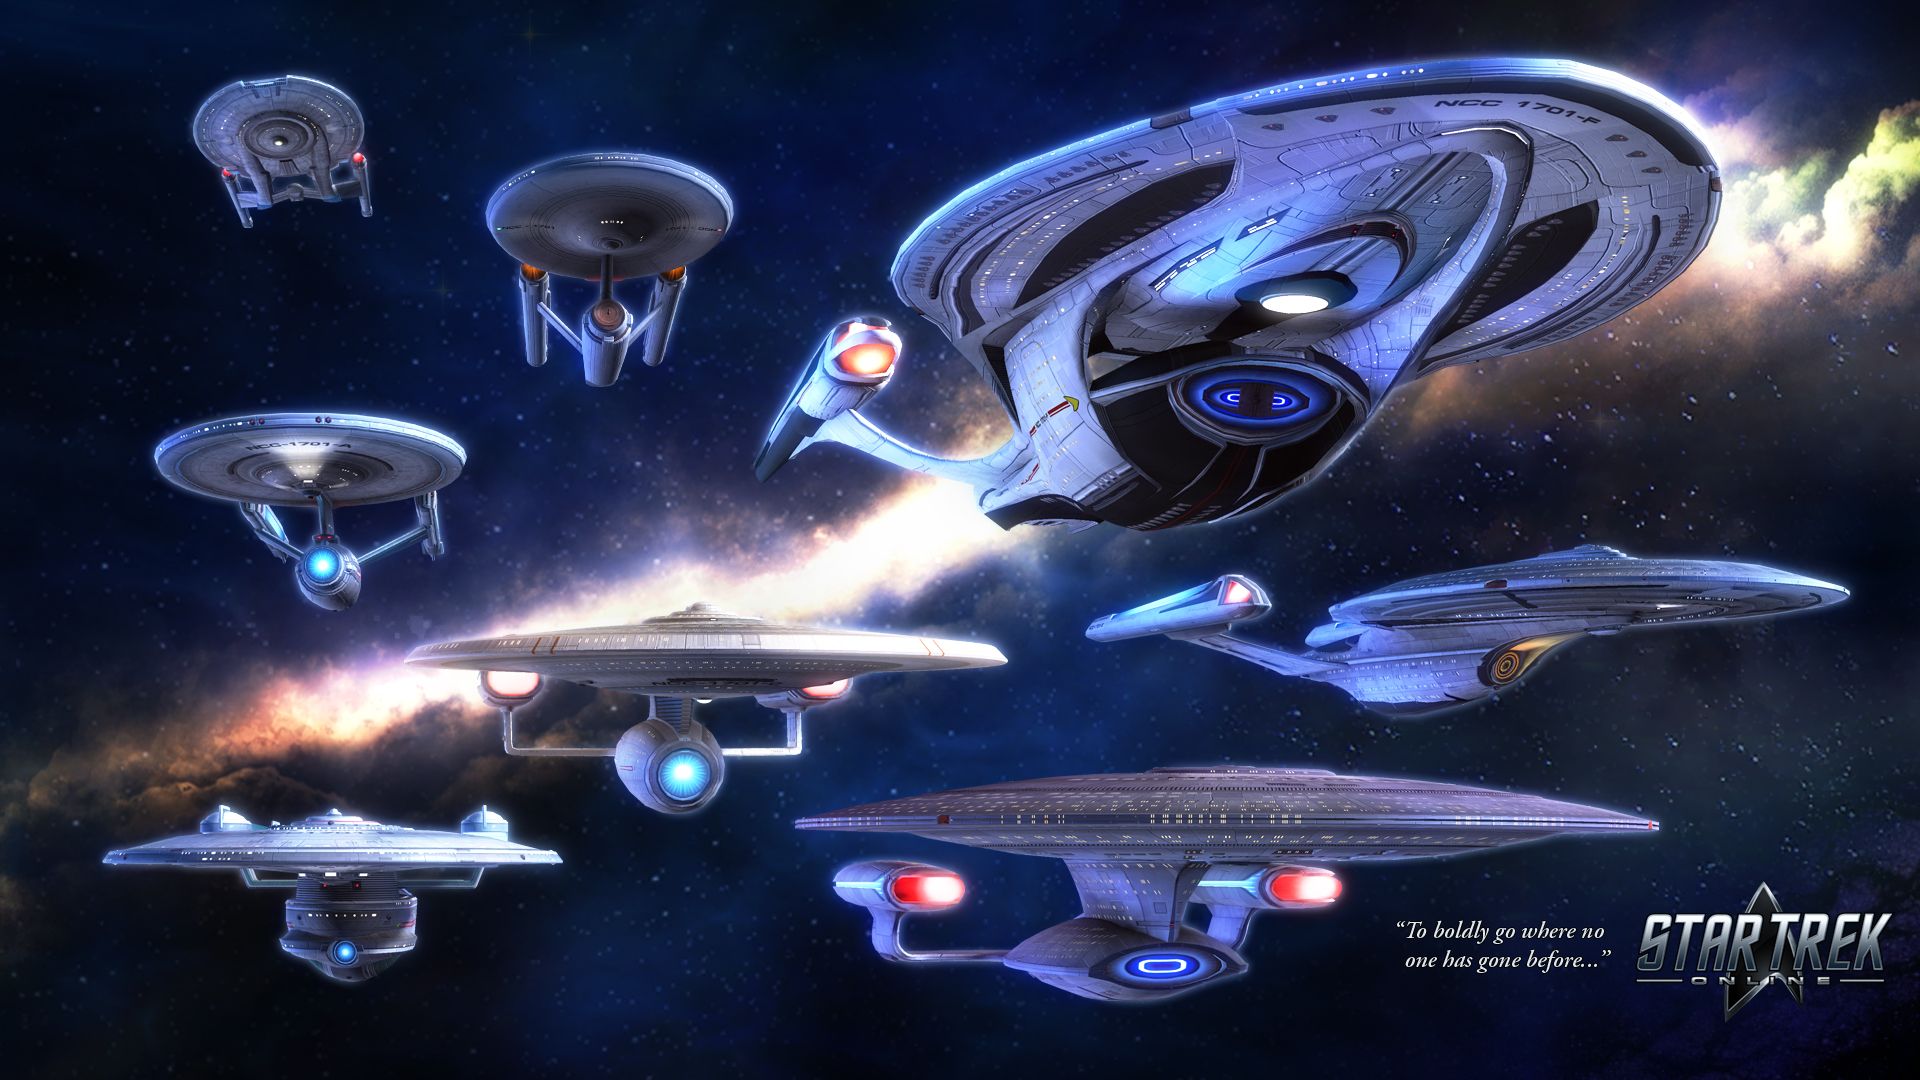 Share can I get a federation ships through time photo startrek